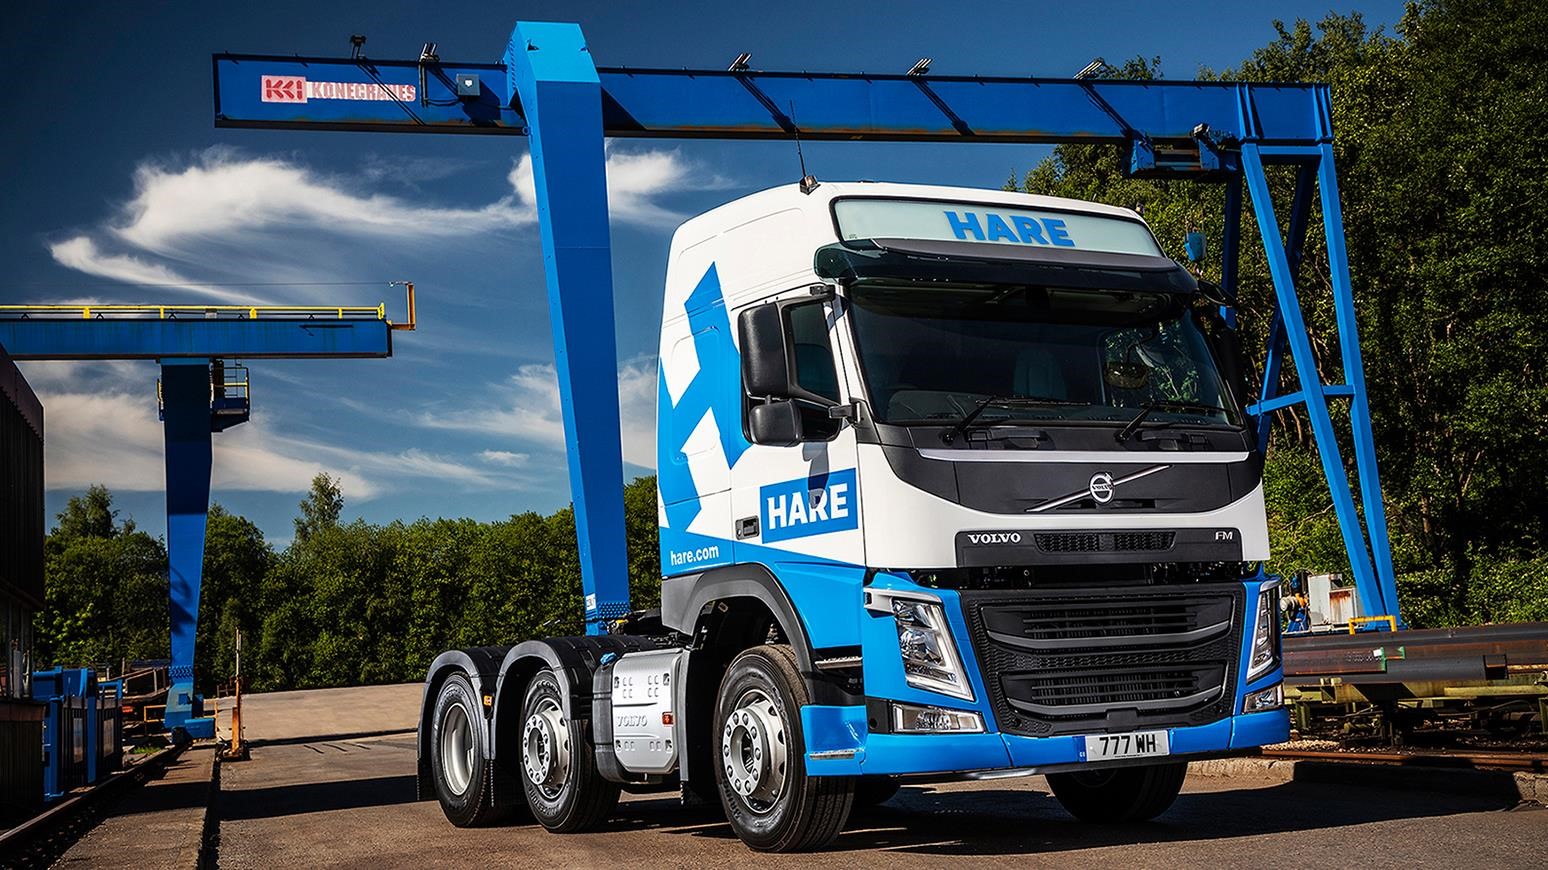 Wm. Hare Group Chooses Volvo FM-460 6x2 For Its Durability & Reliability